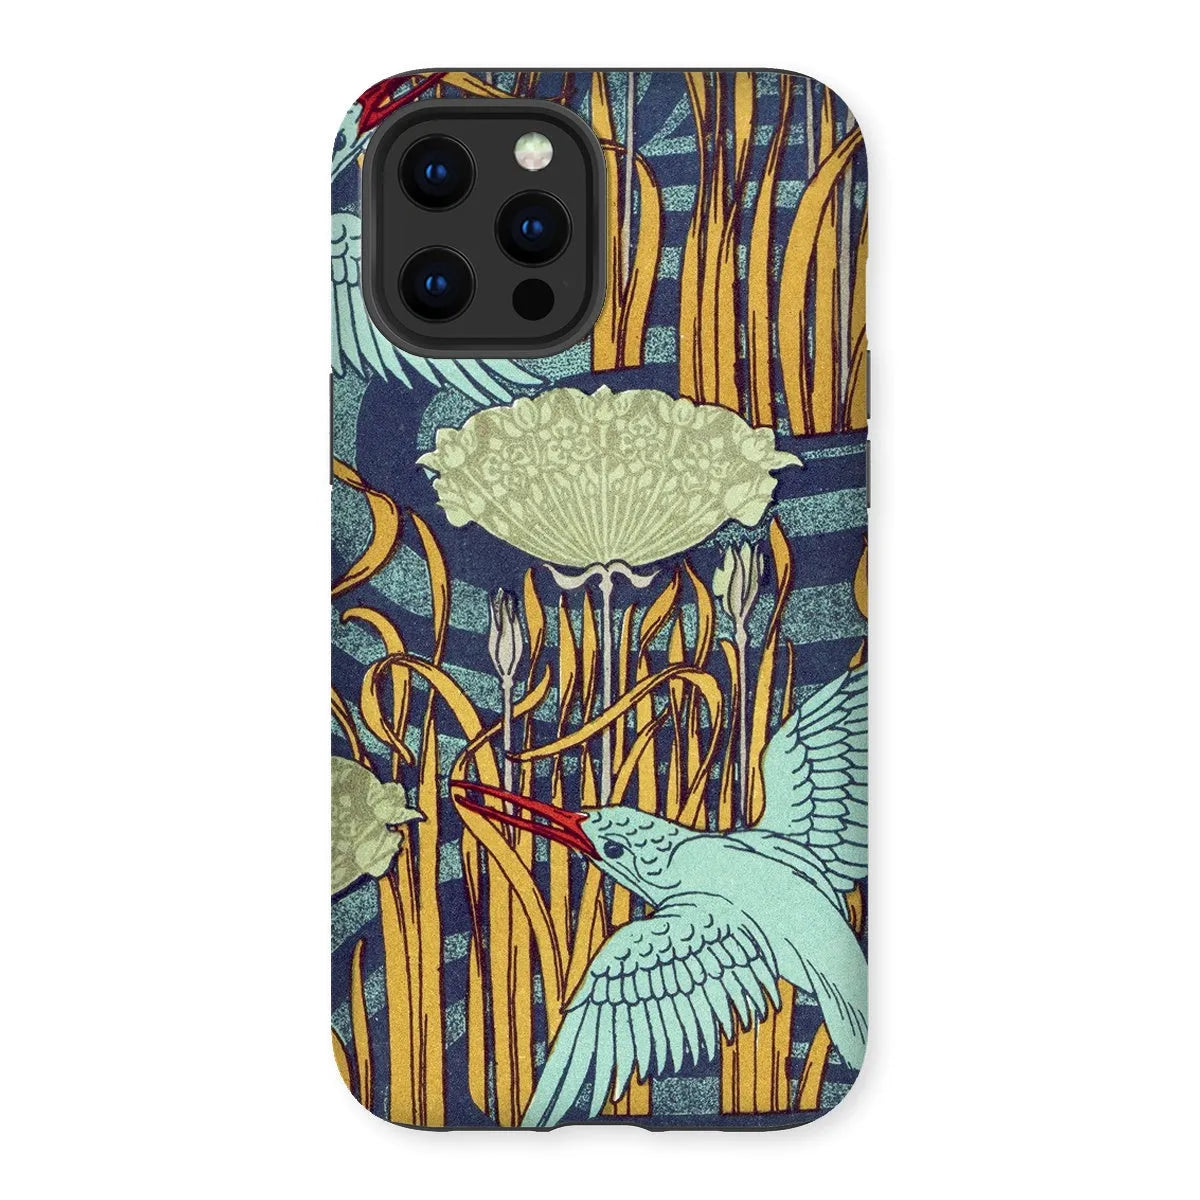 Kingfishers French Art Phone Case - Maurice Pillard Verneuil - Iphone 12 Pro Max / Matte - Mobile Phone Cases